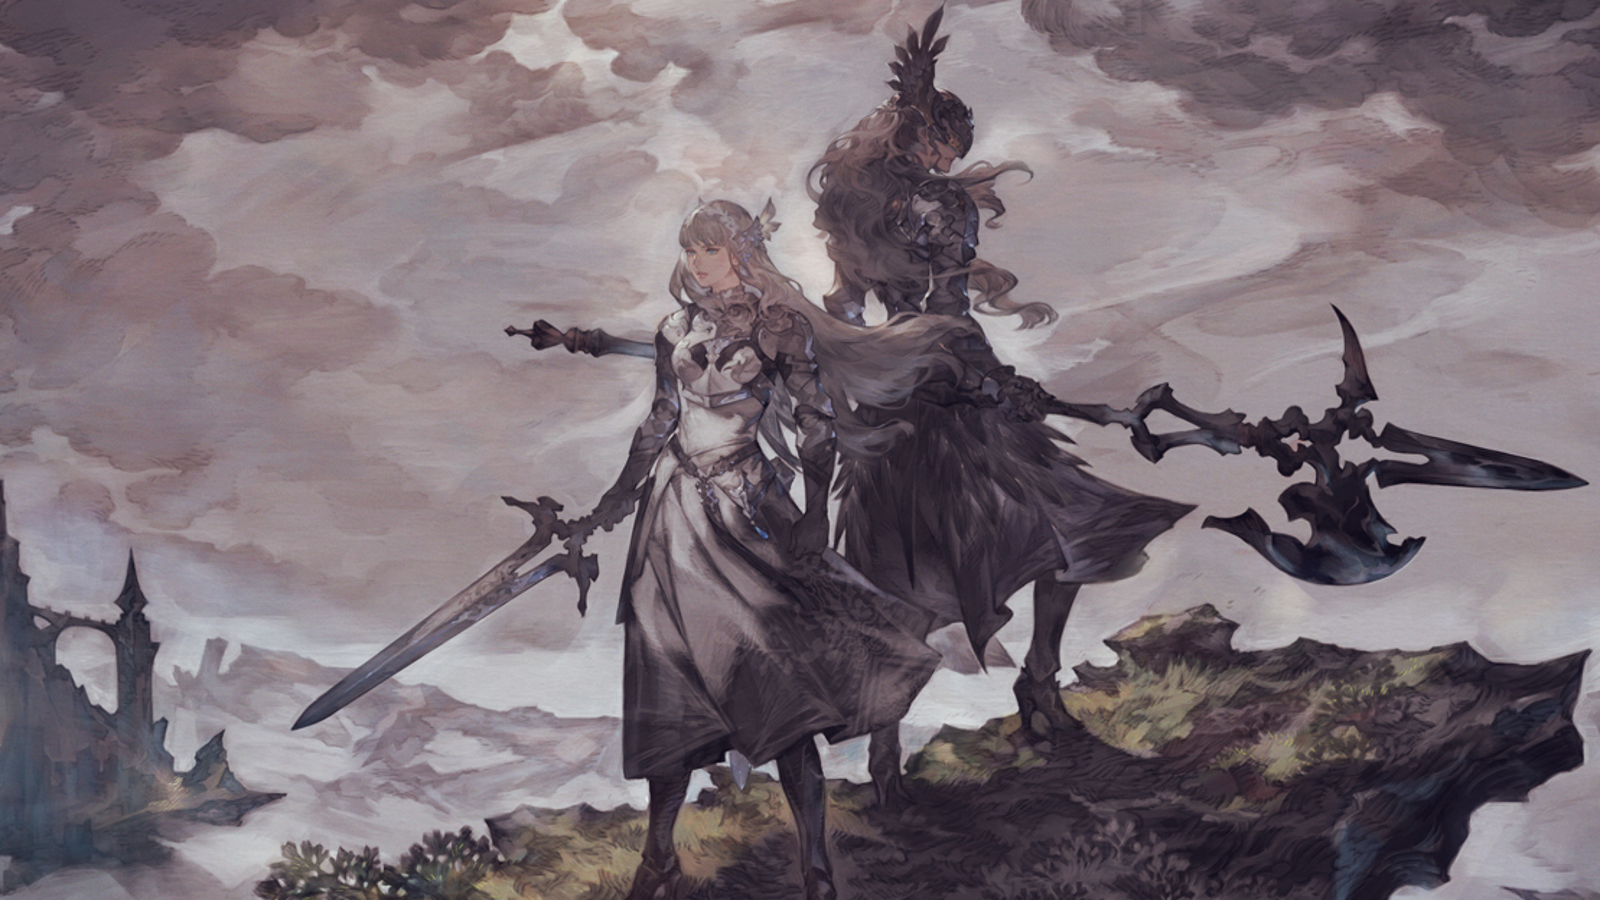 Valkyrie Anatomia developer teases new large-scale RPG for PlayStation 4